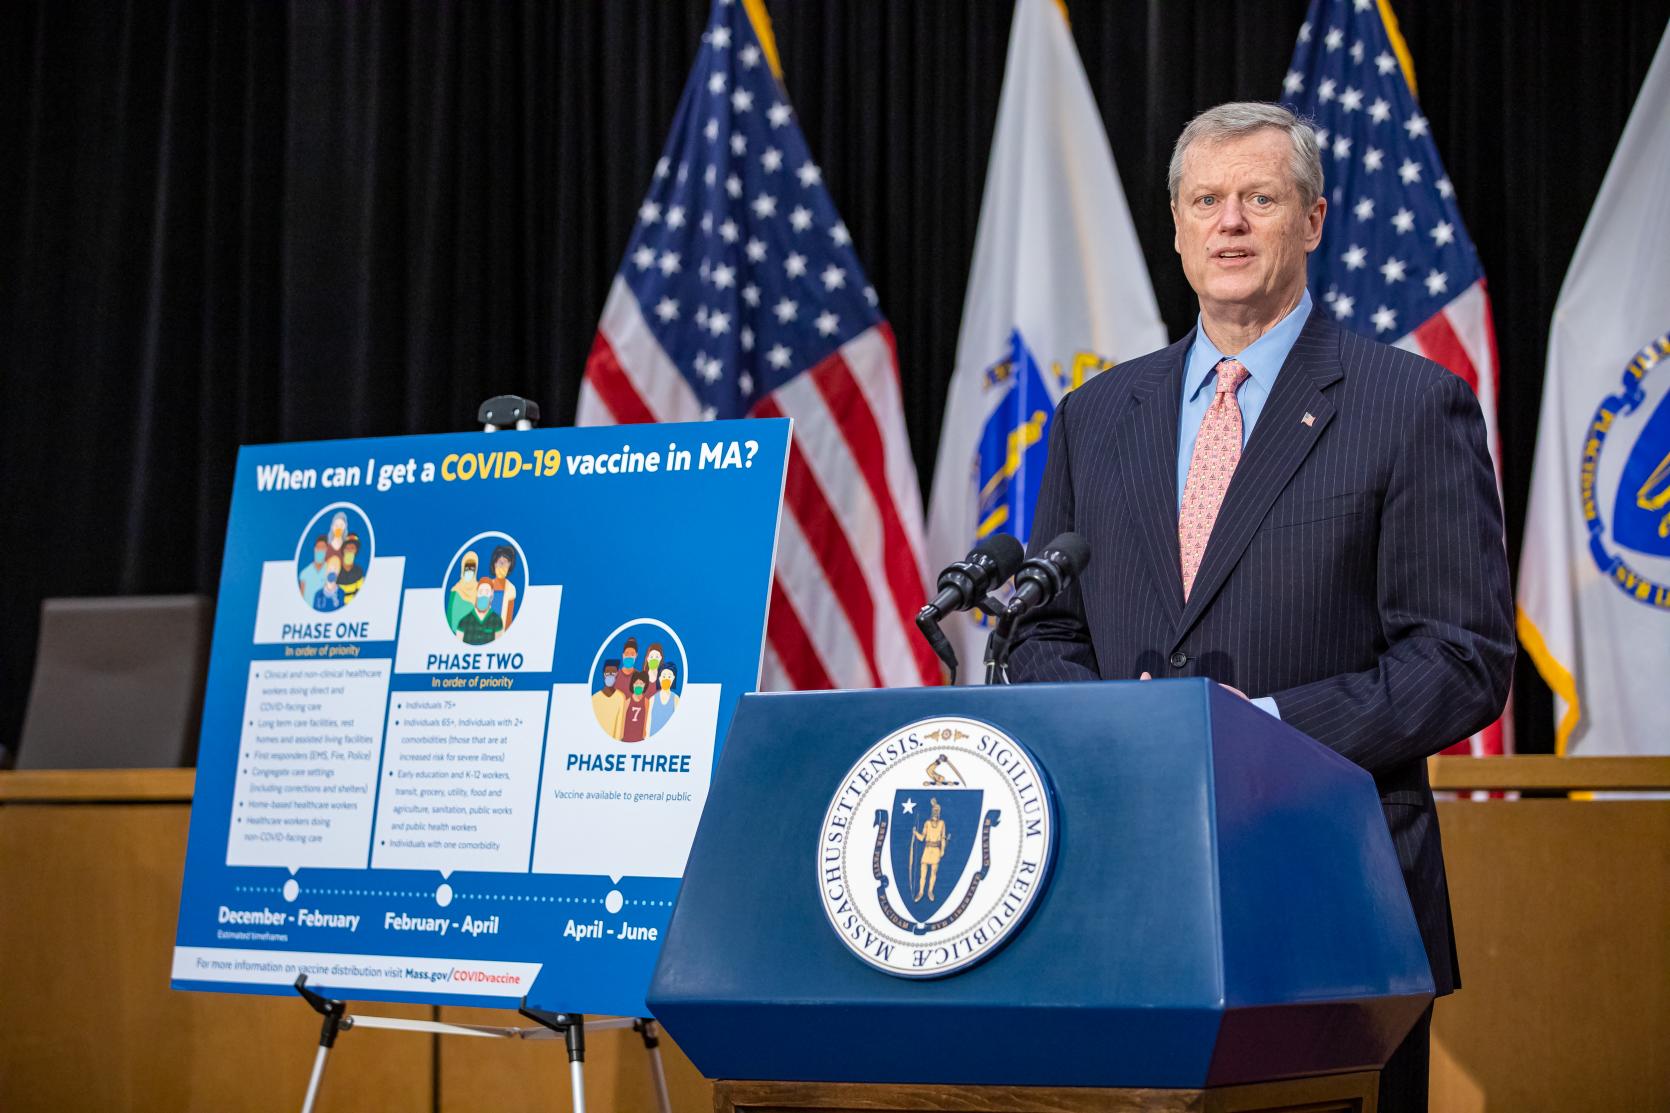 Baker-Polito Administration Announces Expansion of COVID-19 Vaccination Sites, Updates to Phase Two